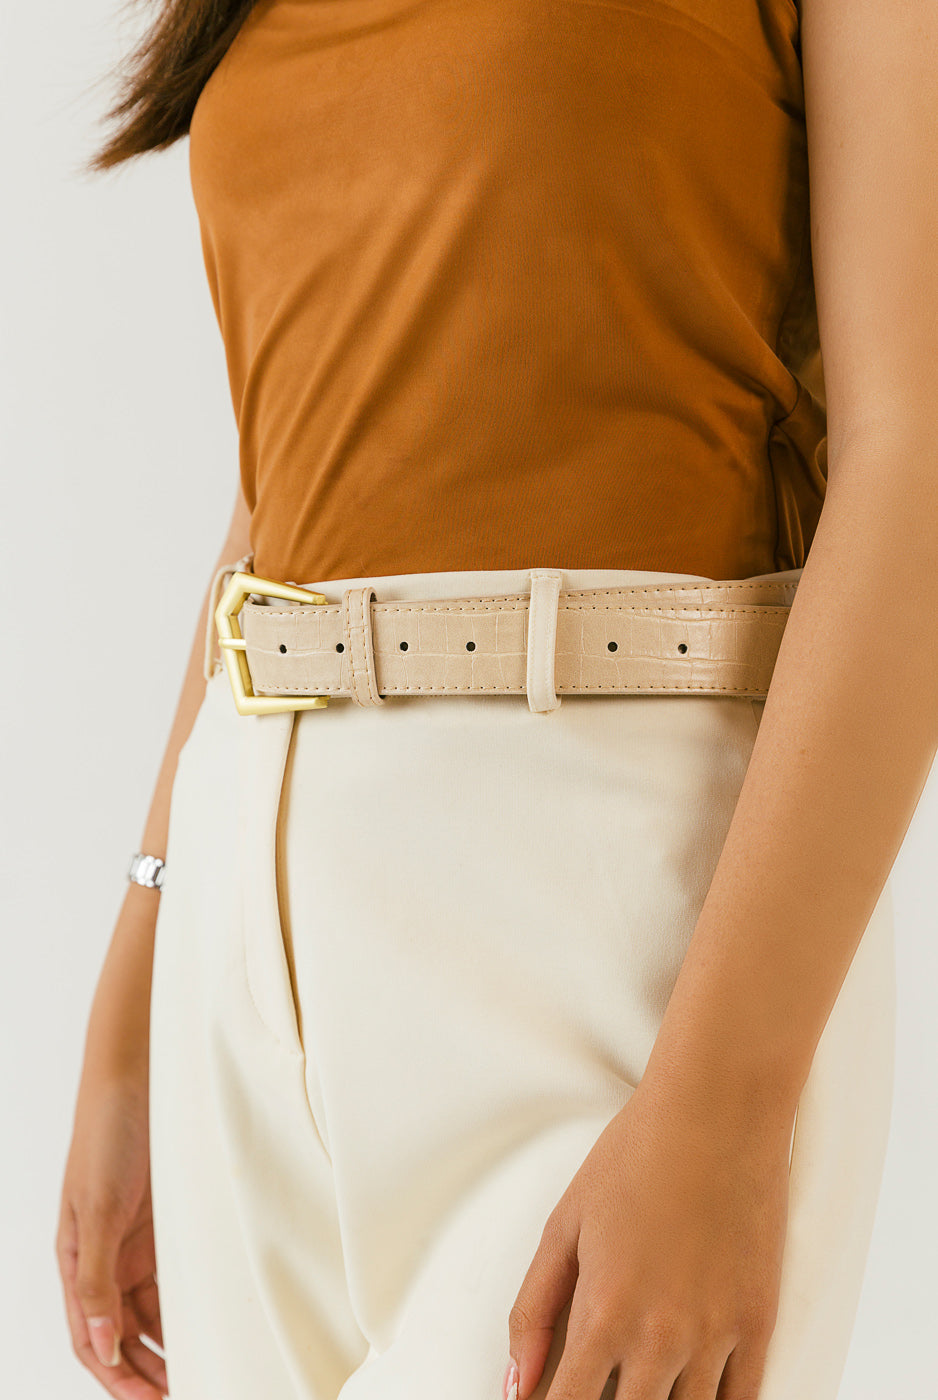 Textured Faux Leather Belt - BEECHTREE